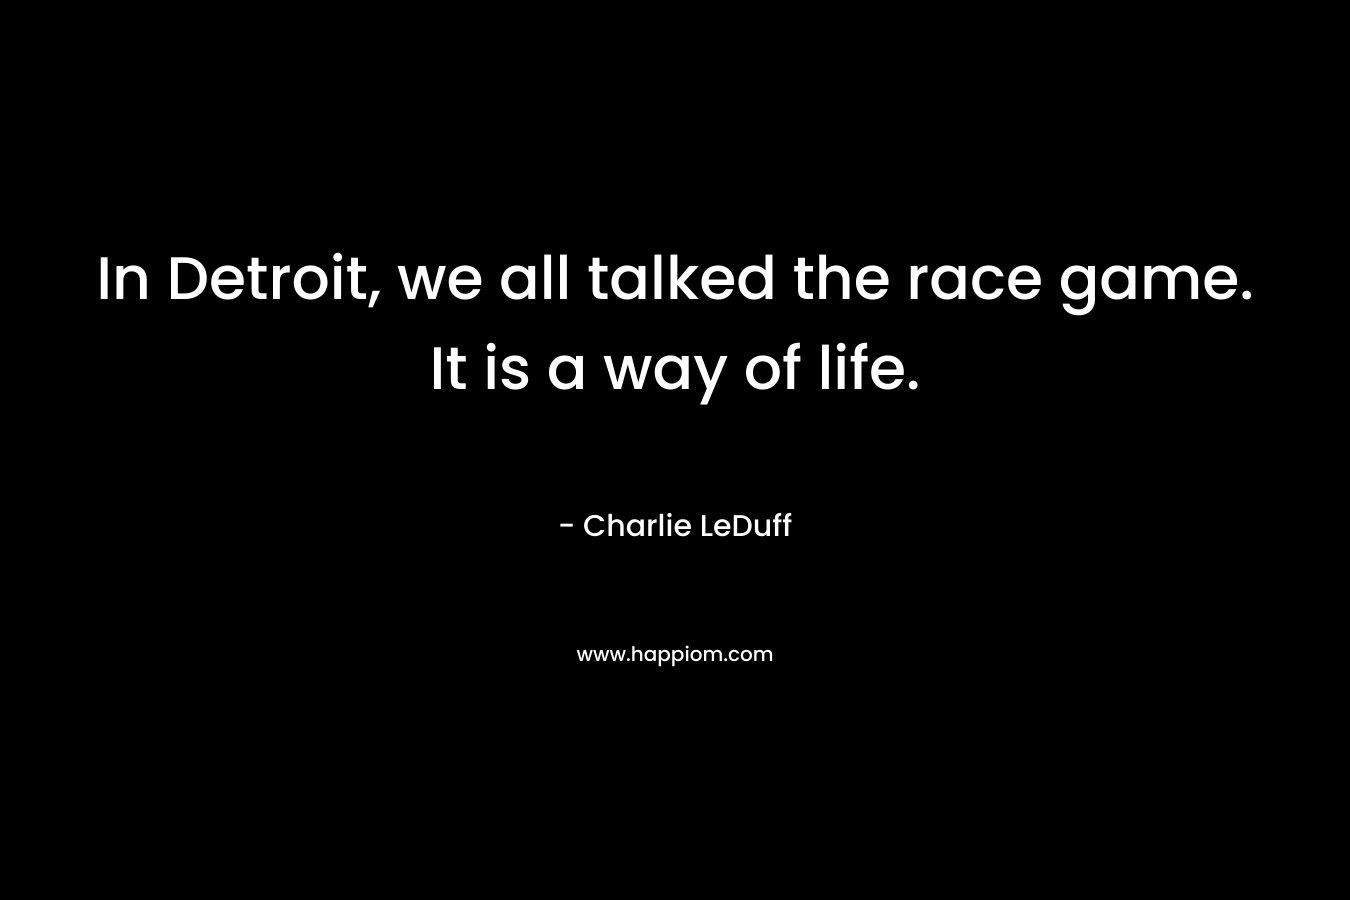 In Detroit, we all talked the race game. It is a way of life. – Charlie LeDuff